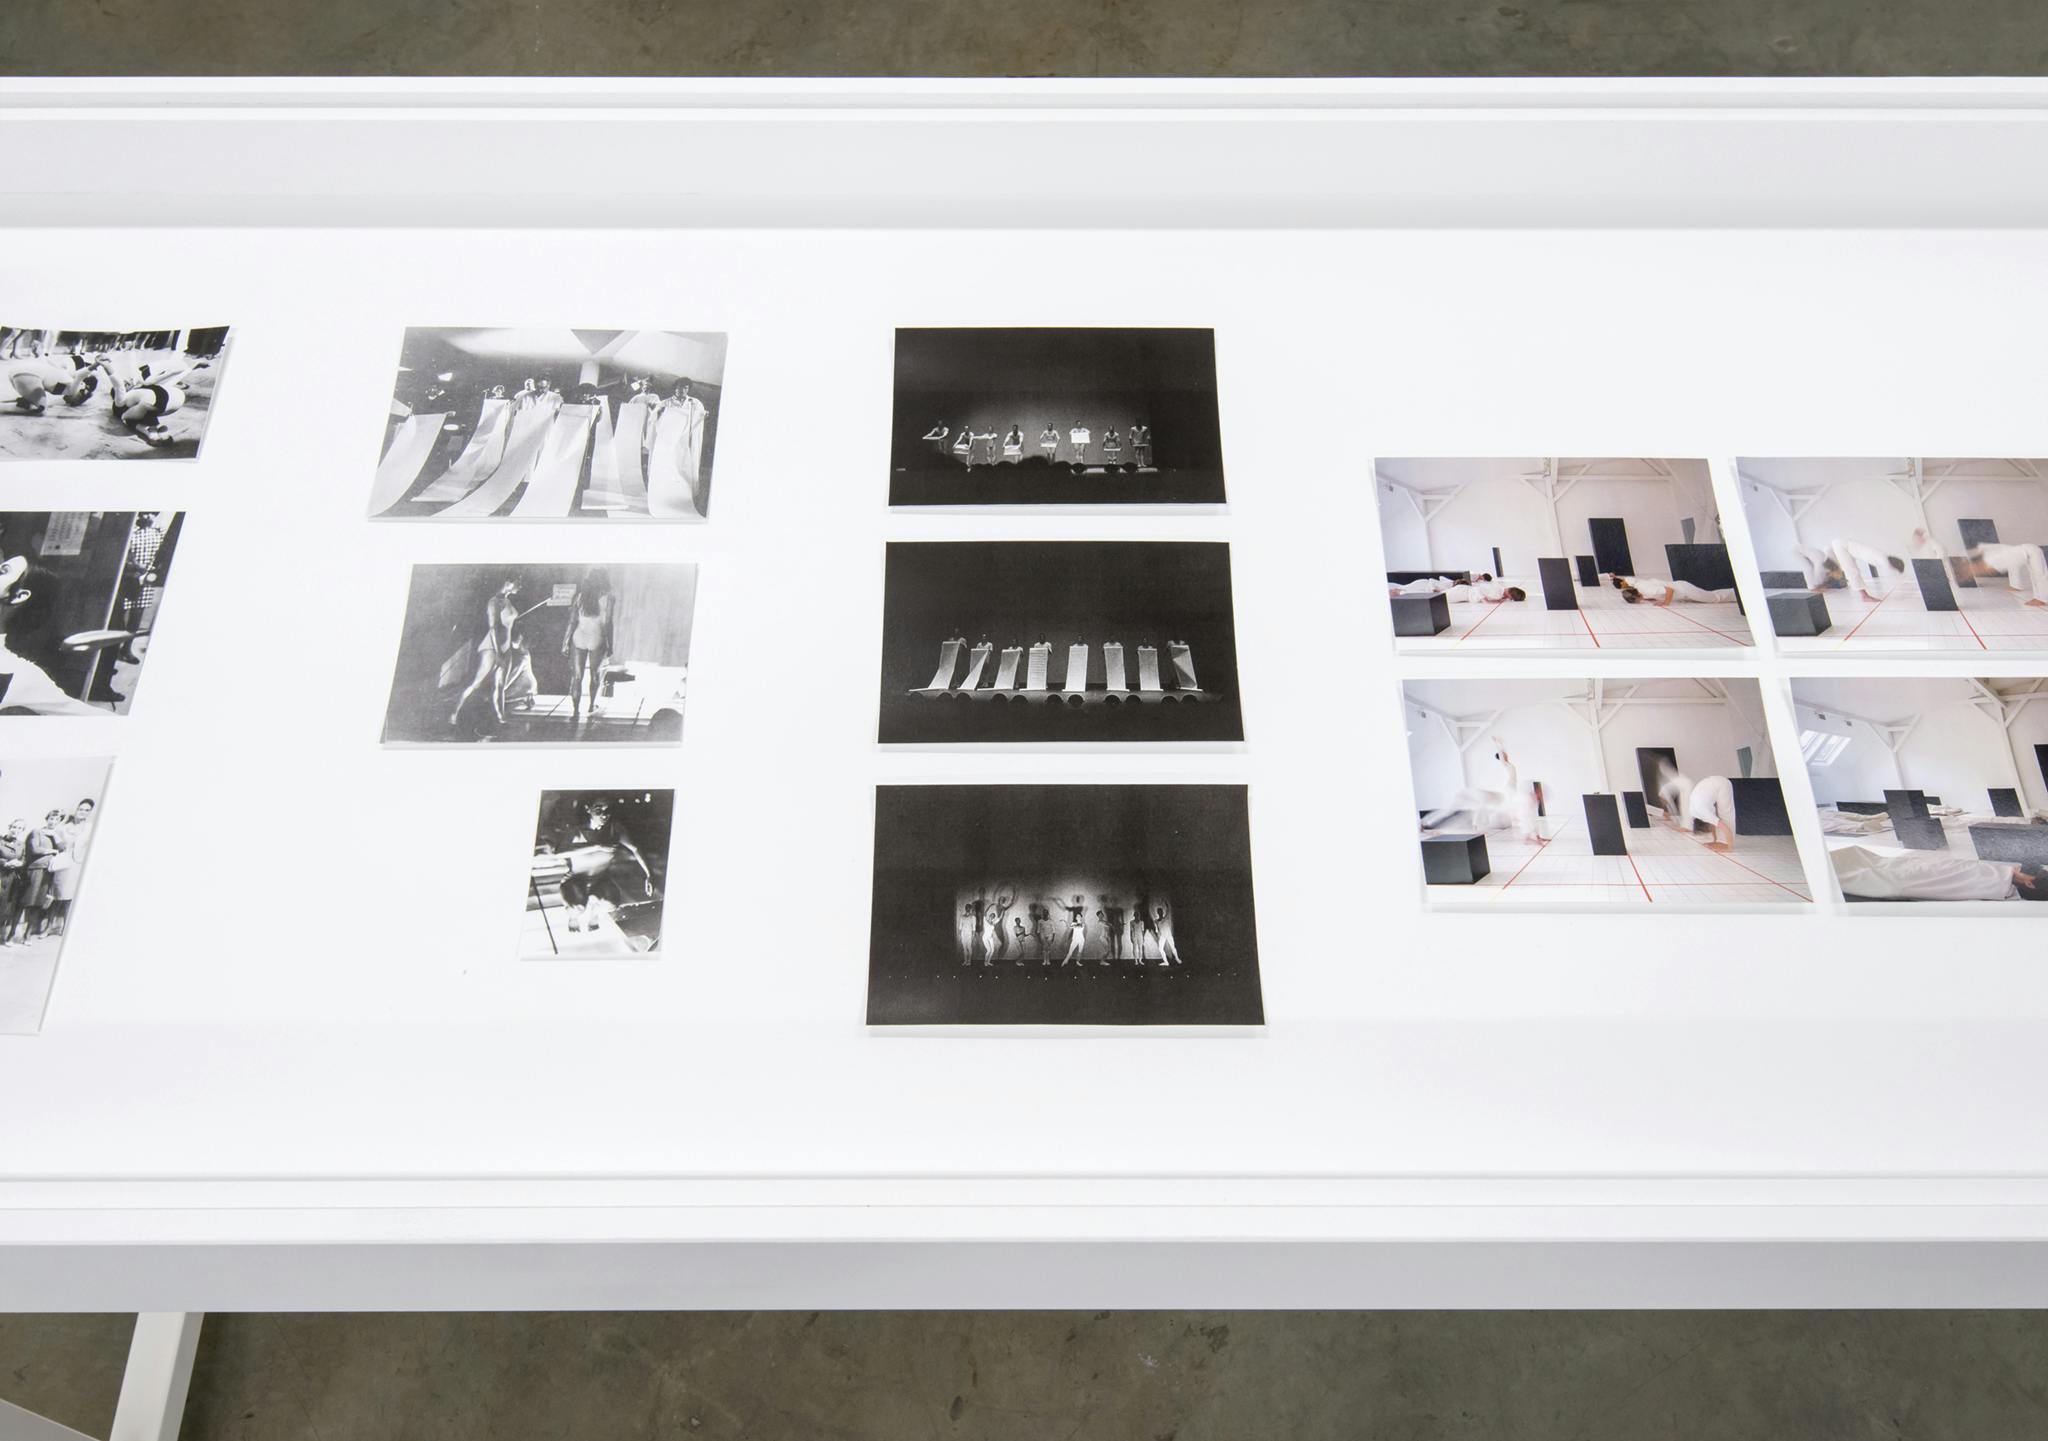 A detail image of the work of Channa Horwitz on a display vitrine. The thirteen photos are laid out in groups of three or four. The photos show groups of people in black in white and in colour.